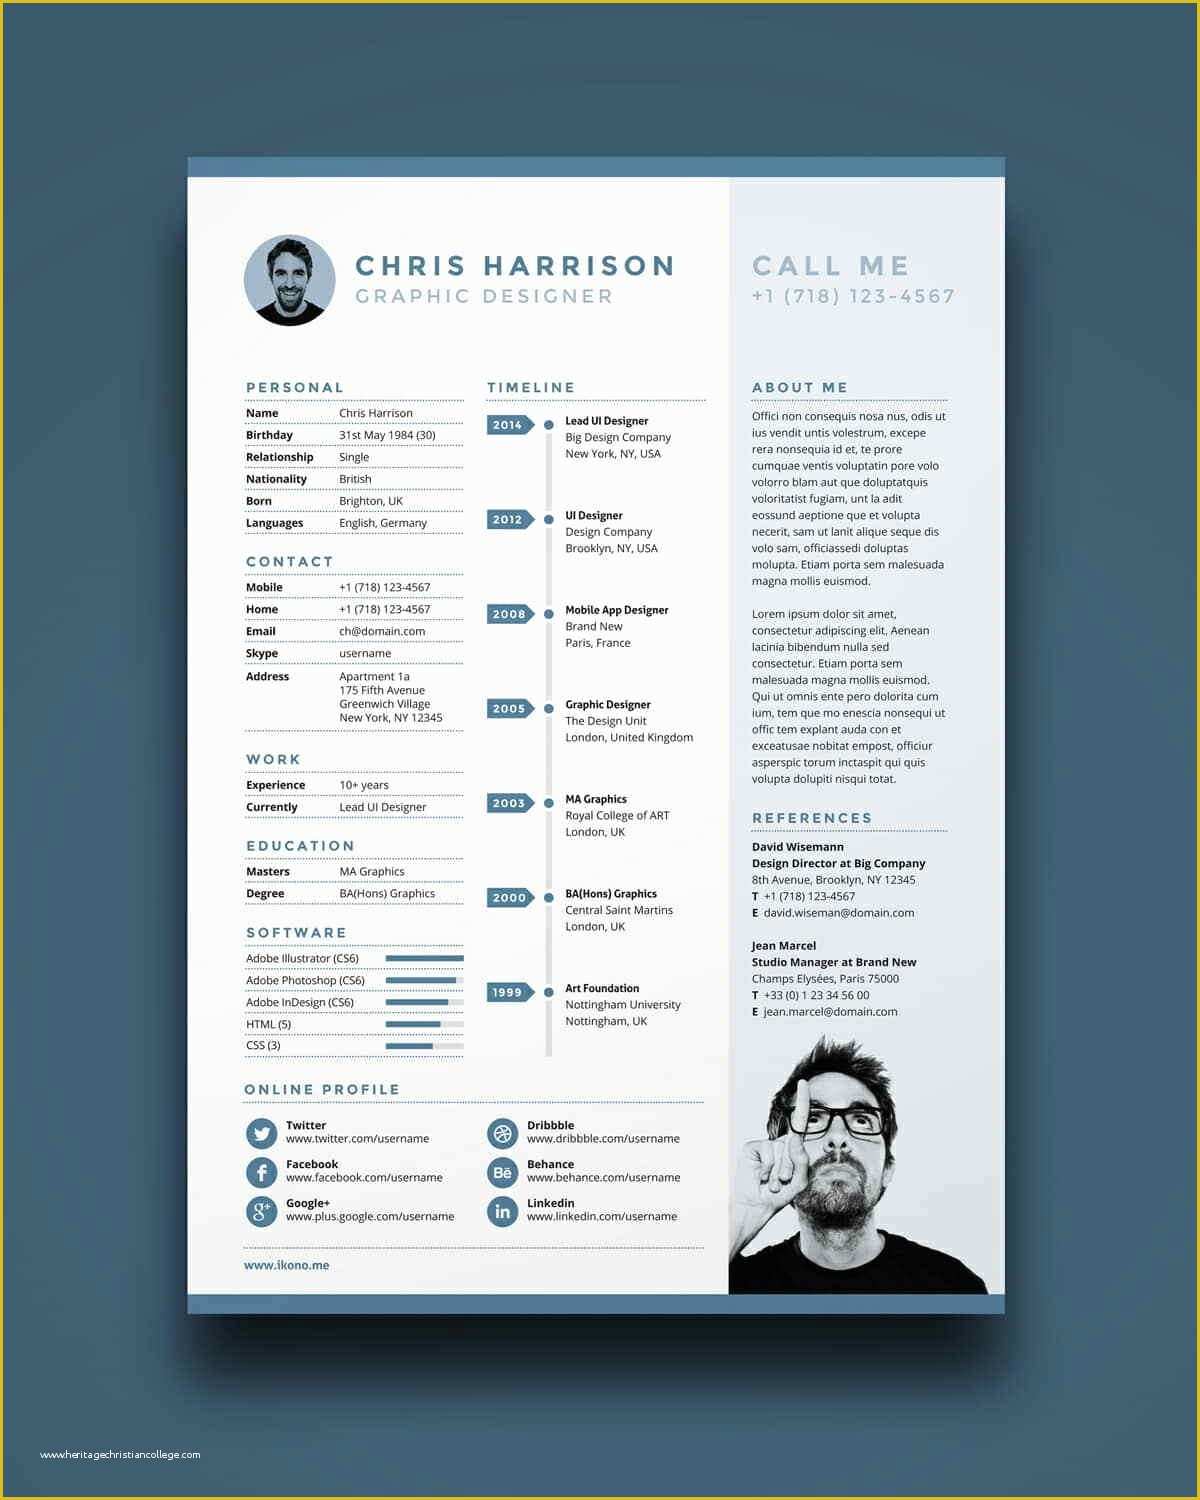 Curriculum Vitae Template Free Of Free Resume Templates 17 Free Cv Templates to Download & Use